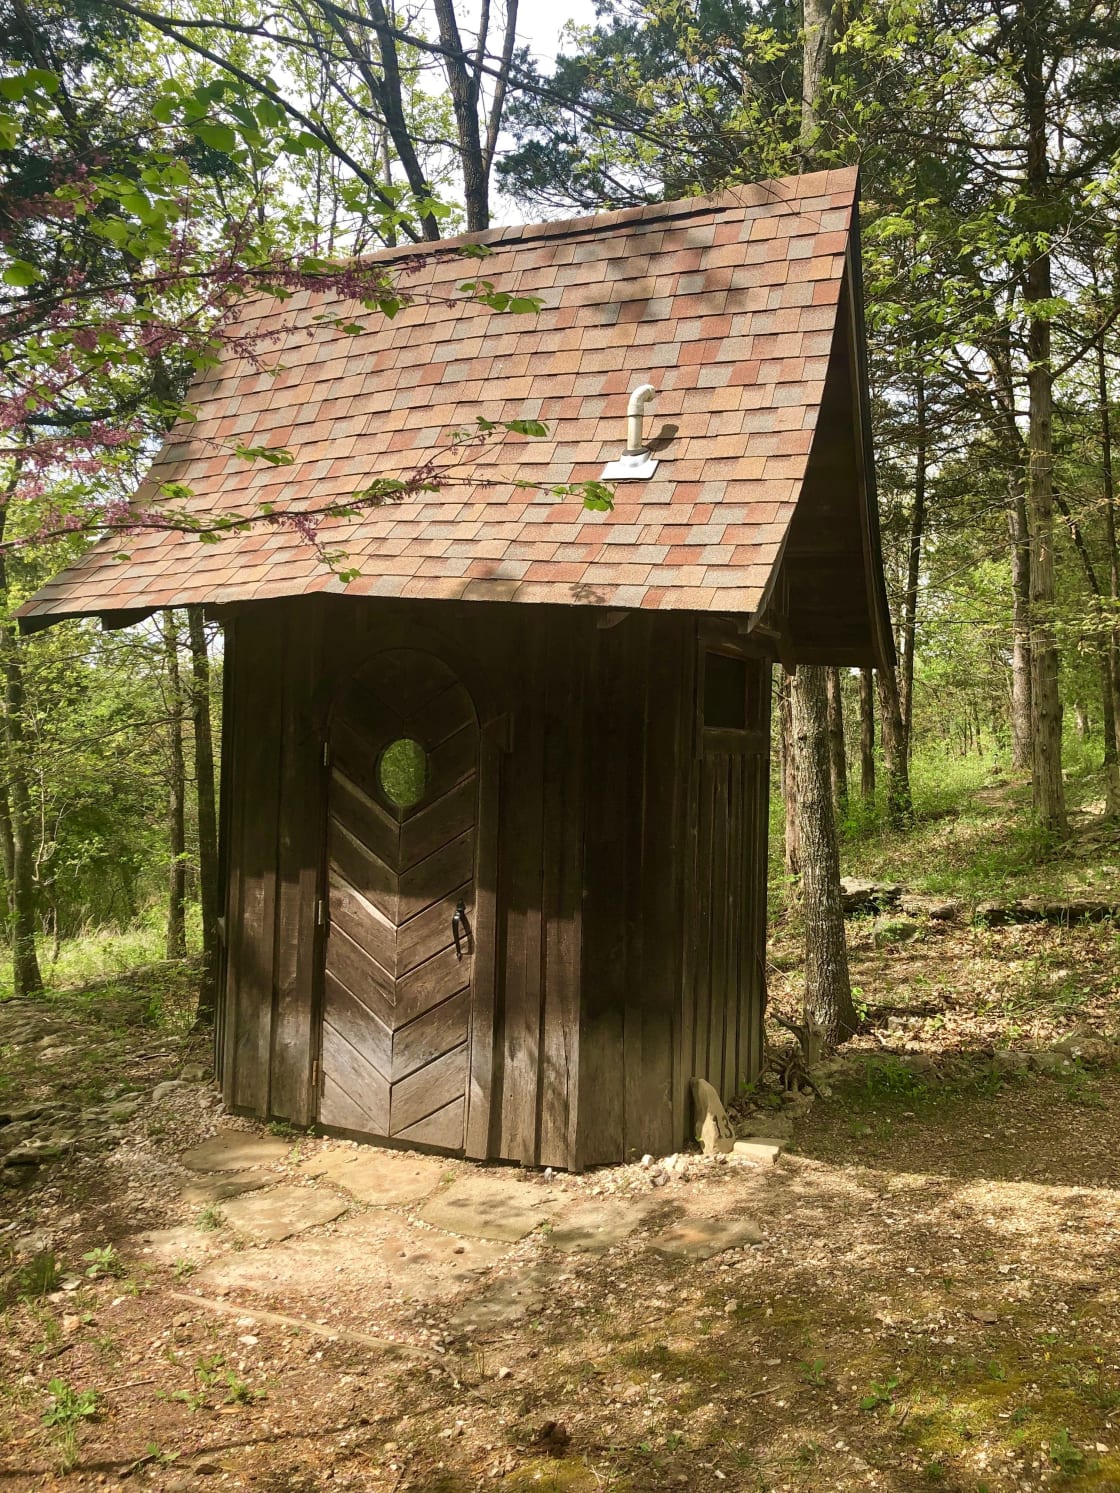 The composting toilet outhouse is spacious and well lit by windows overlooking the Sanctuary.  It never smells of anything other than cedar!